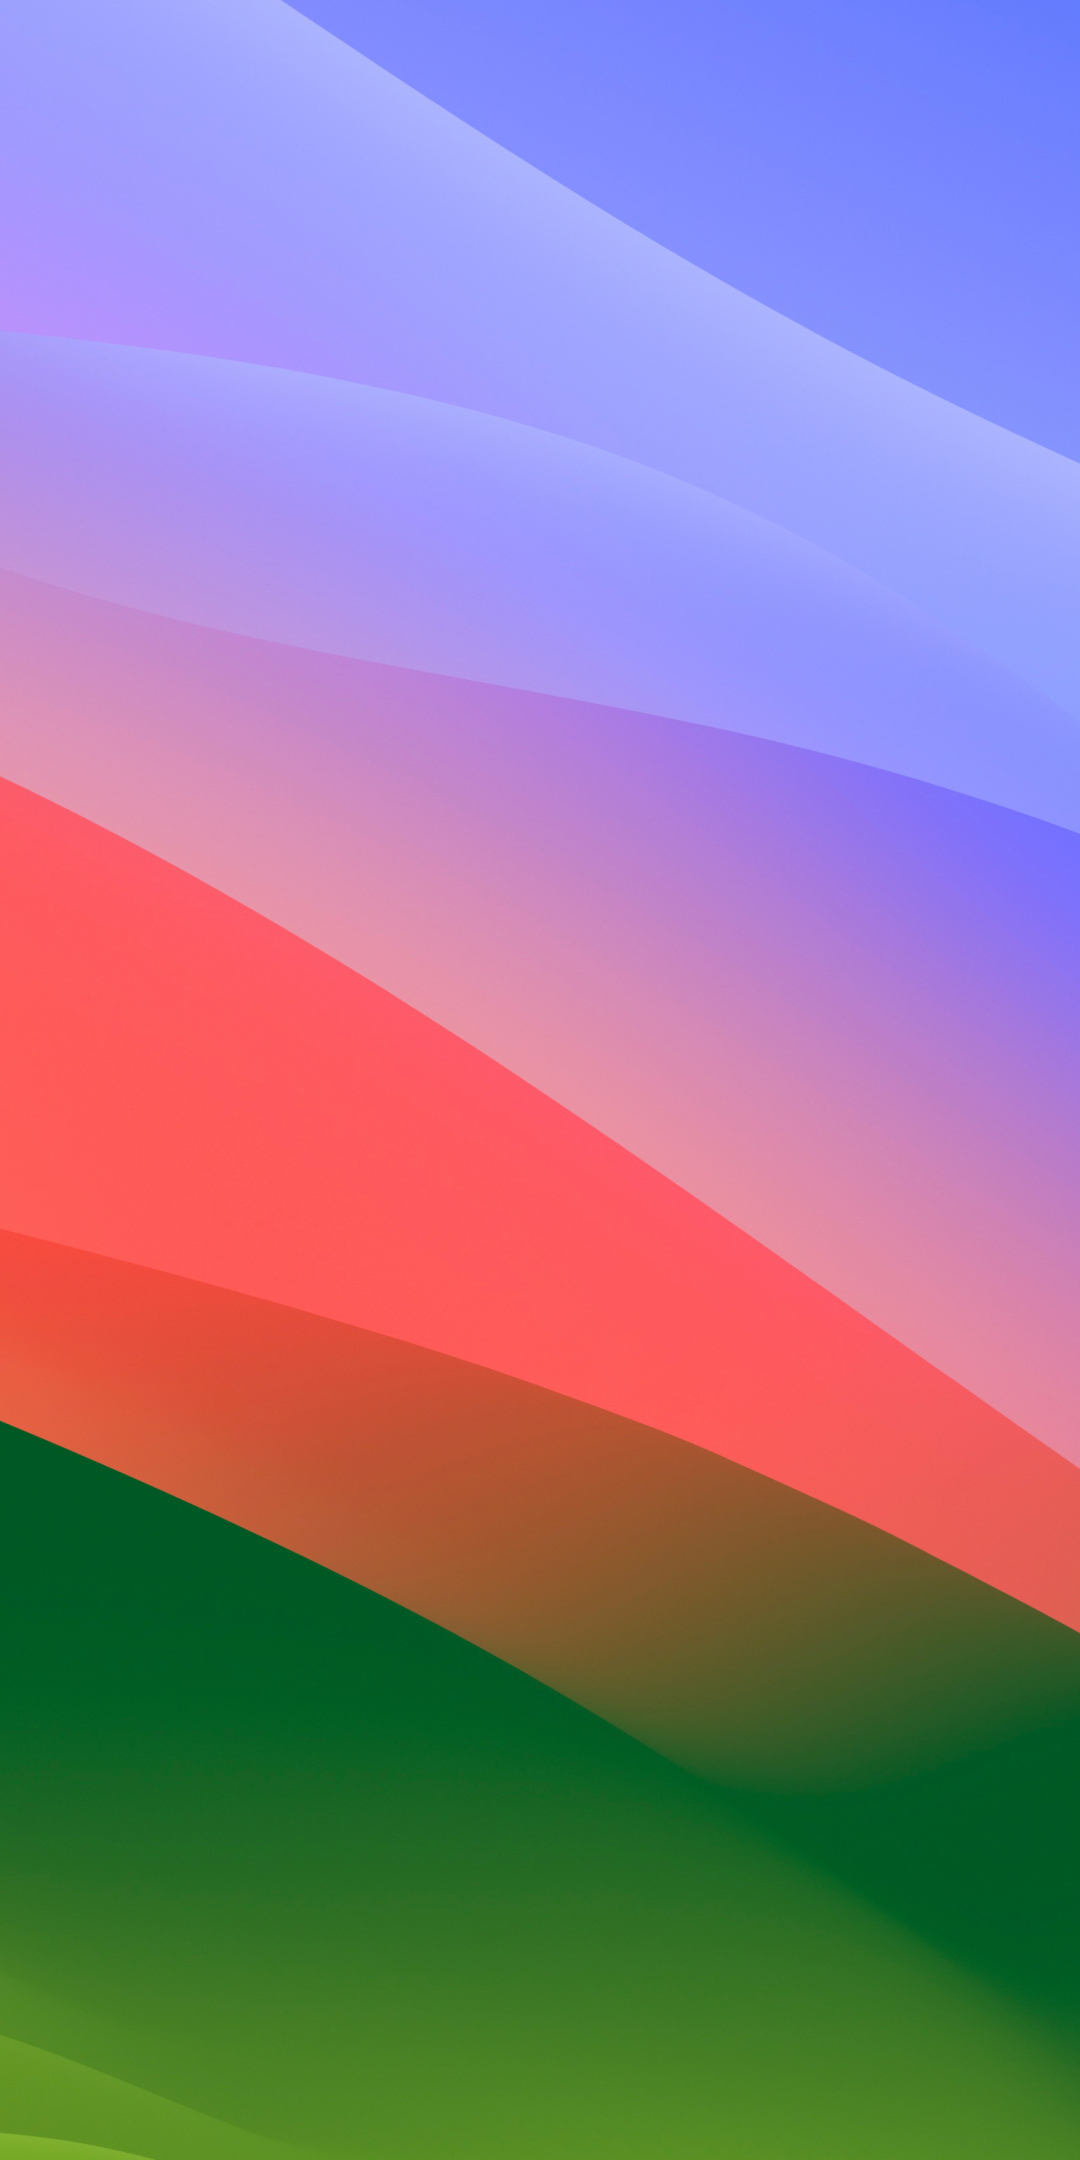 MacOS Sonoma, colorful waves, stock photo, 1080x2160 wallpaper